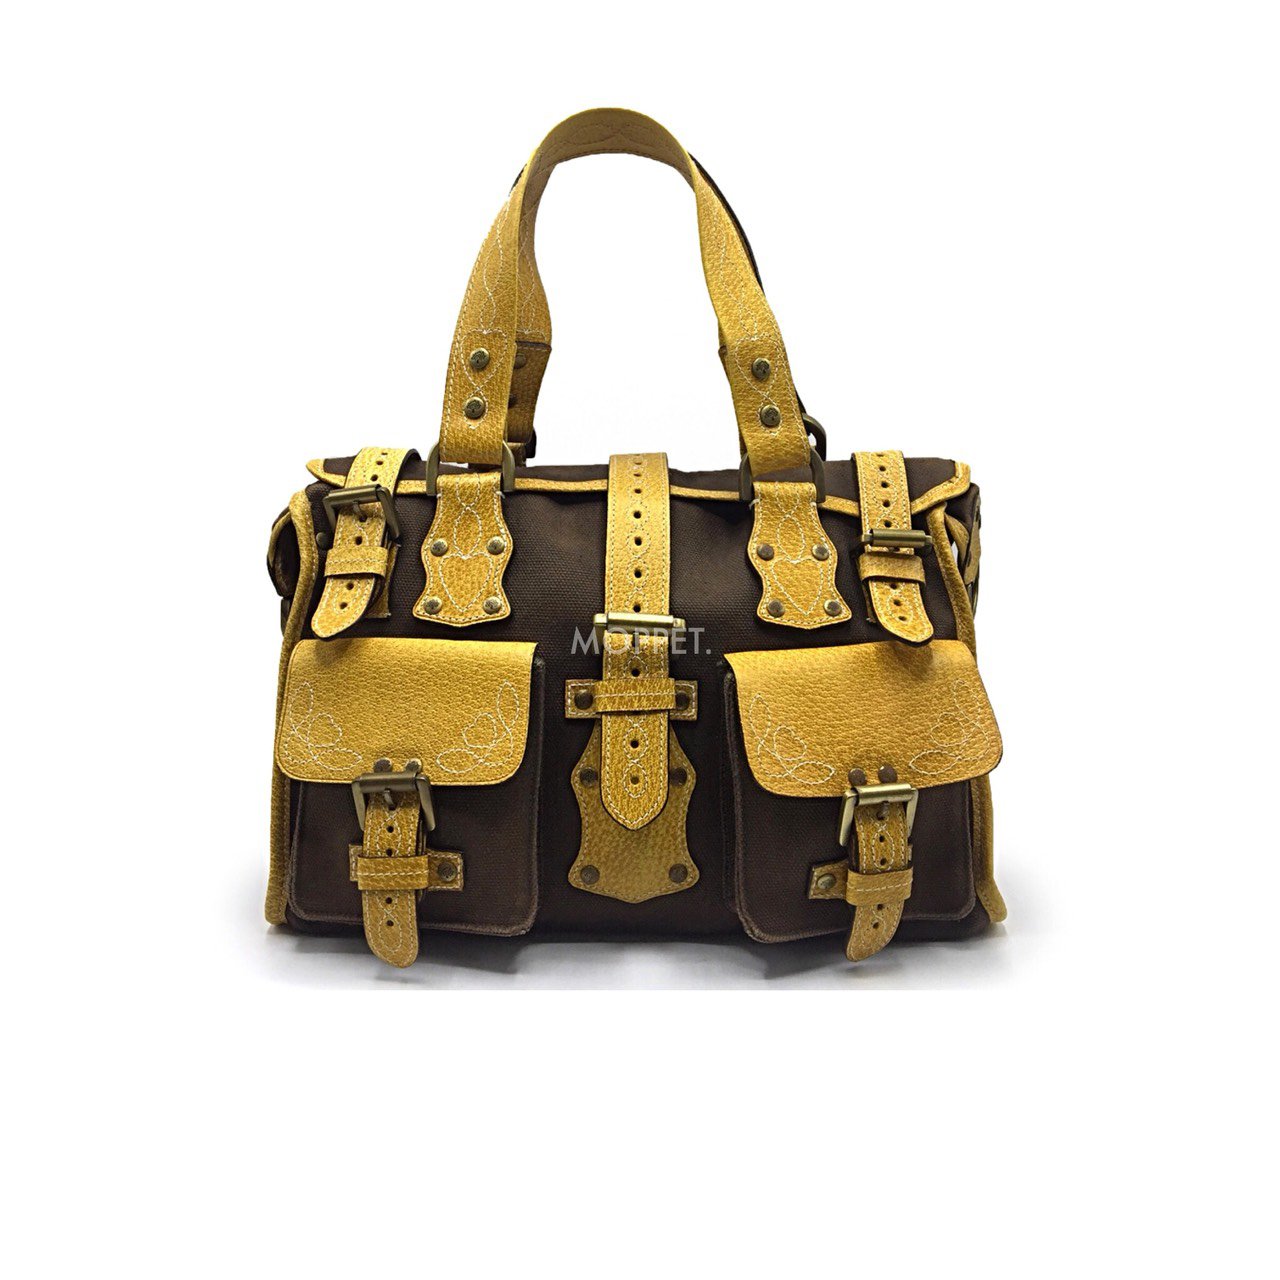 Used Mulberry Roxanne Handbag in Khaki/Yellow Leather GHW